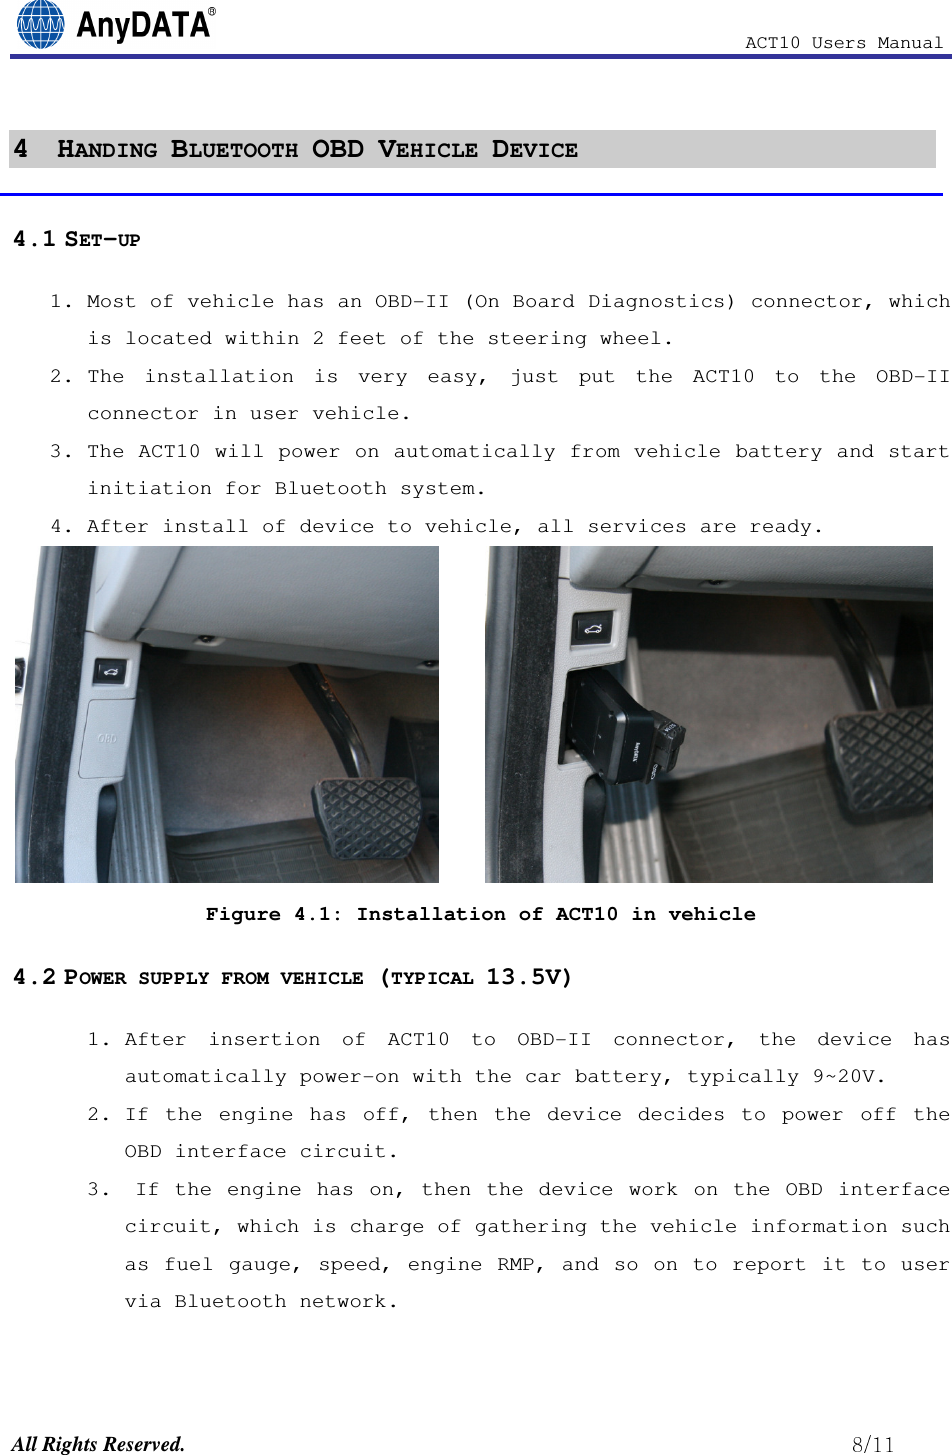                                                            ACT10 Users Manual  All Rights Reserved.                                                          4  HANDING BLUETOOTH OBD VEHICLE DEVICE  4.1 SET-UP 1. Most of vehicle has an OBD-II (On Board Diagnostics) connector, which is located within 2 feet of the steering wheel. 2. The  installation  is  very  easy,  just  put  the  ACT10  to  the  OBD-II connector in user vehicle.  3. The ACT10 will power on automatically from vehicle battery and start initiation for Bluetooth system.  4. After install of device to vehicle, all services are ready.       Figure 4.1: Installation of ACT10 in vehicle 4.2 POWER SUPPLY FROM VEHICLE (TYPICAL 13.5V) 1. After  insertion  of  ACT10  to  OBD-II  connector,  the  device  has automatically power-on with the car battery, typically 9~20V. 2. If  the  engine  has  off,  then  the  device  decides  to  power  off  the OBD interface circuit.  3.  If  the  engine  has  on,  then the  device  work  on  the  OBD  interface circuit, which is charge of gathering the vehicle information such as fuel gauge, speed, engine RMP, and so on to report it to user via Bluetooth network. 